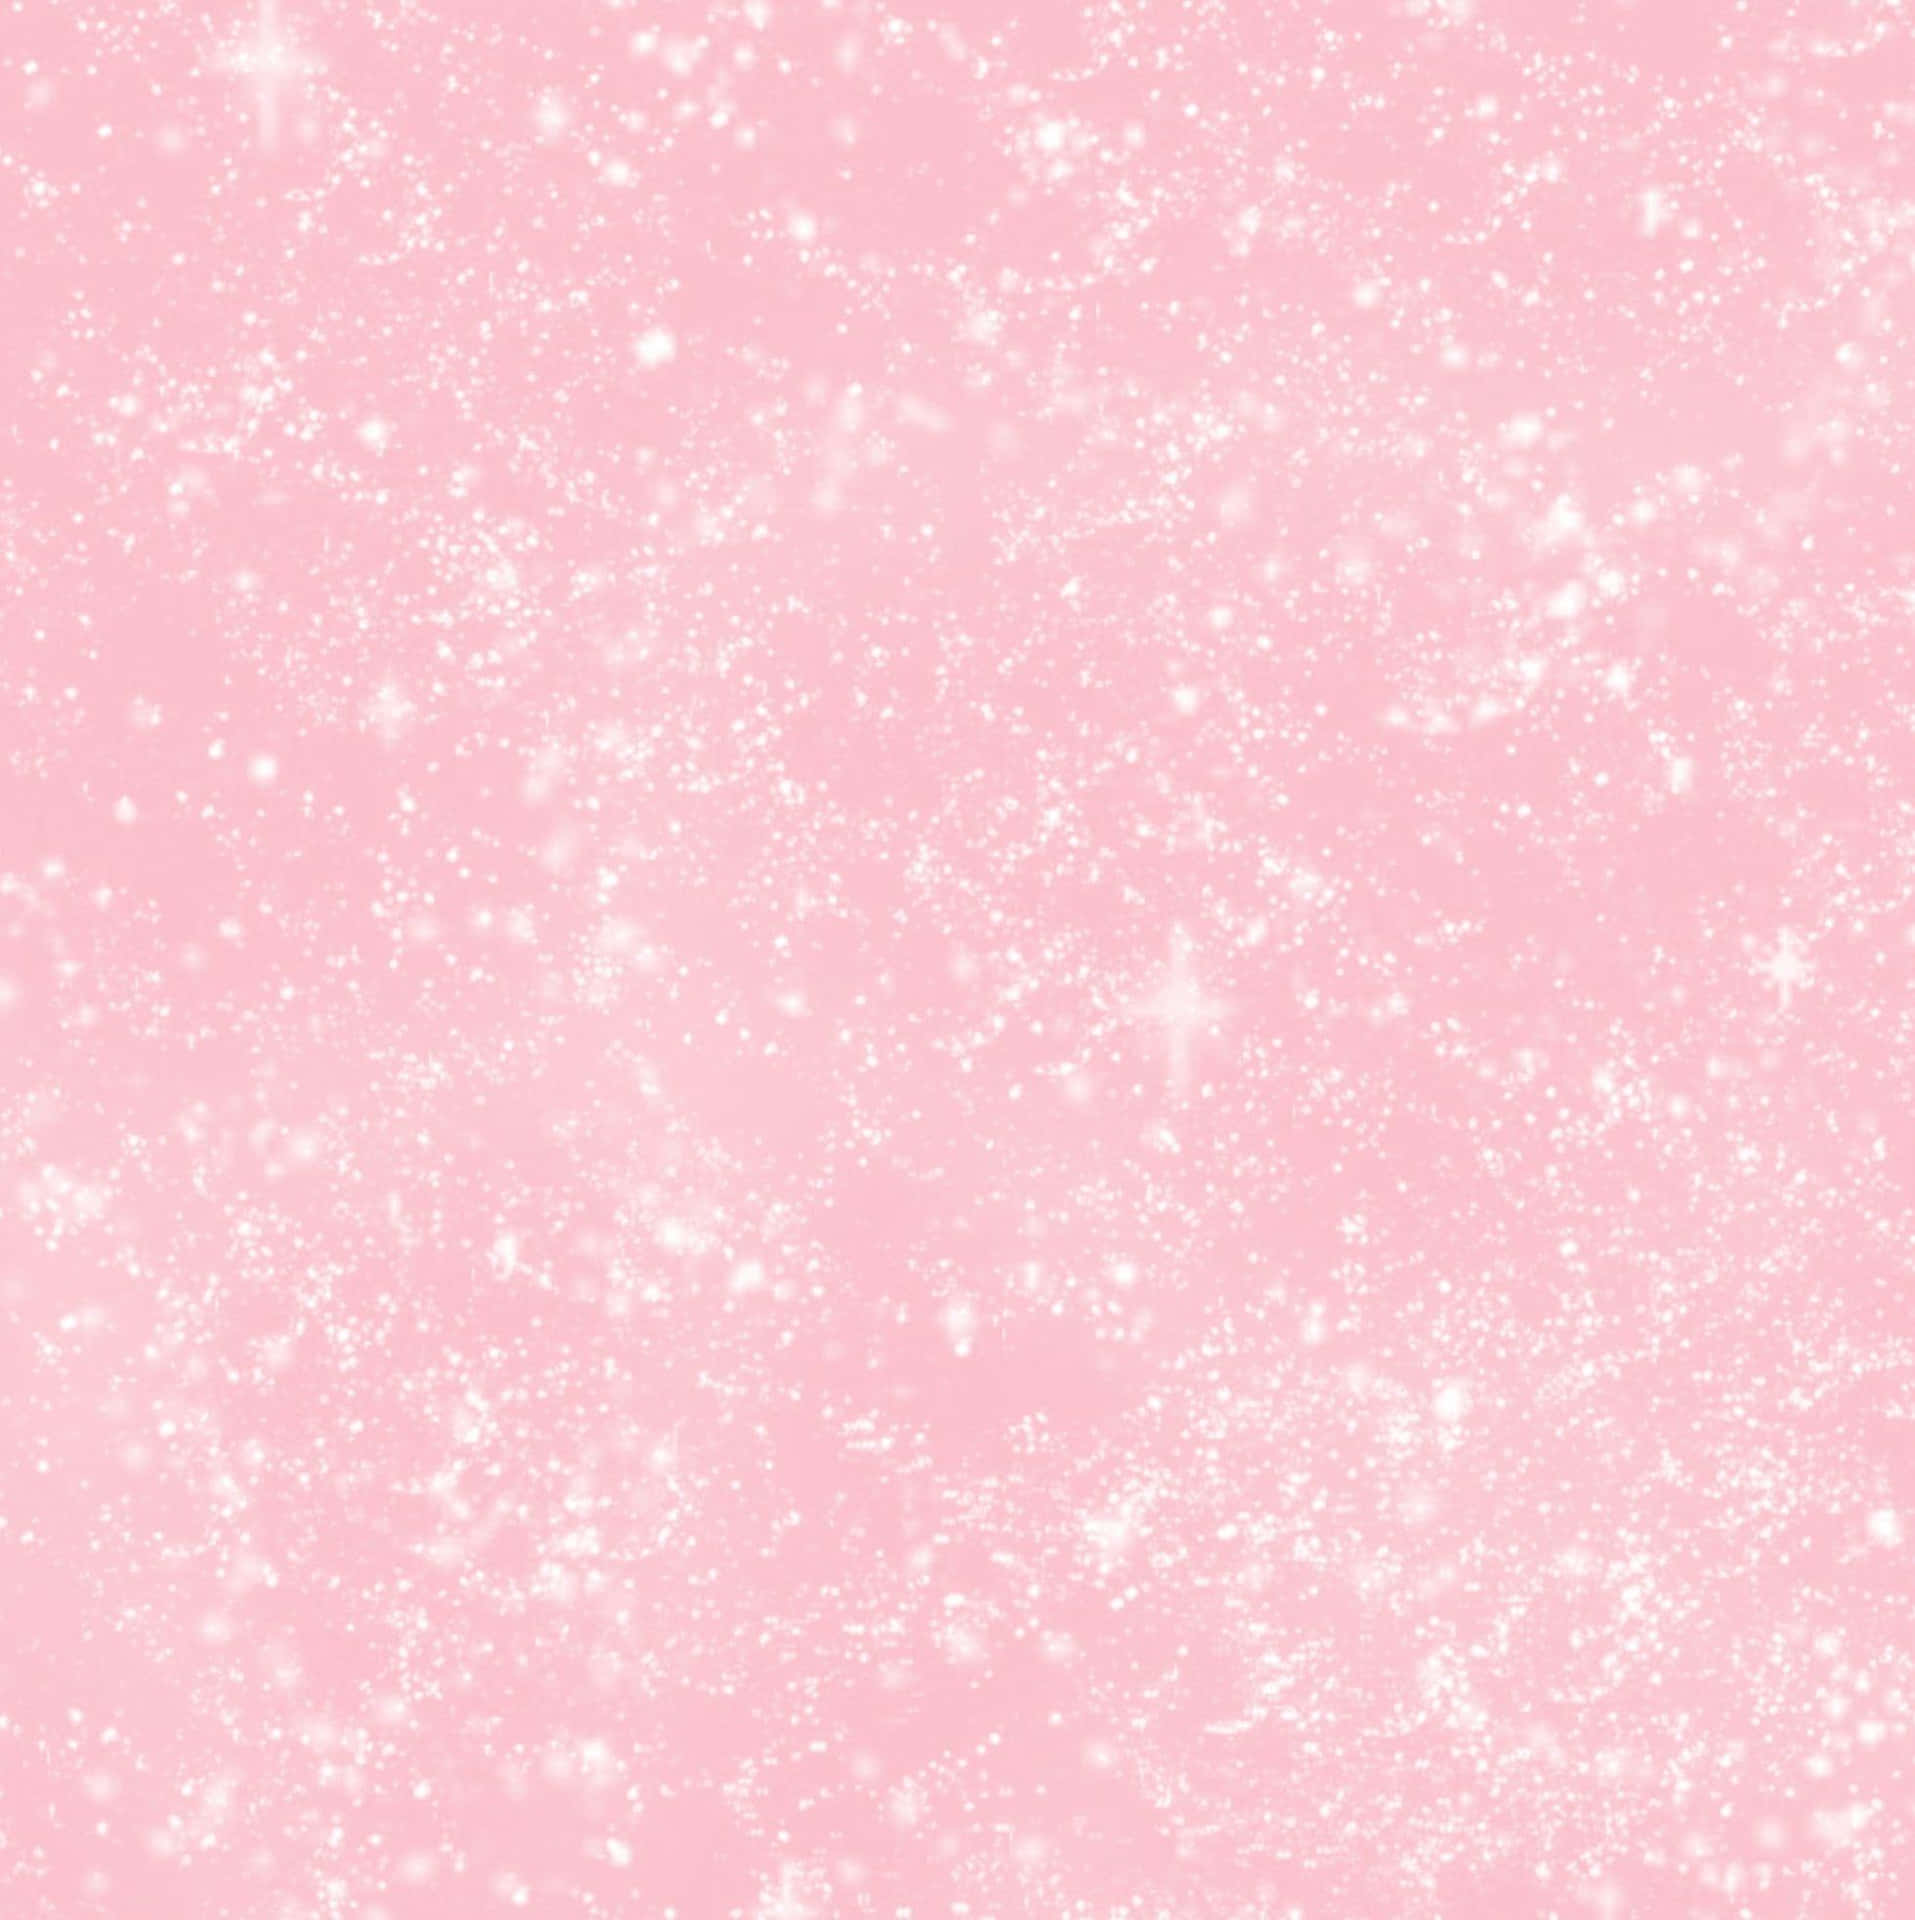 Delicate Blush Pink Background